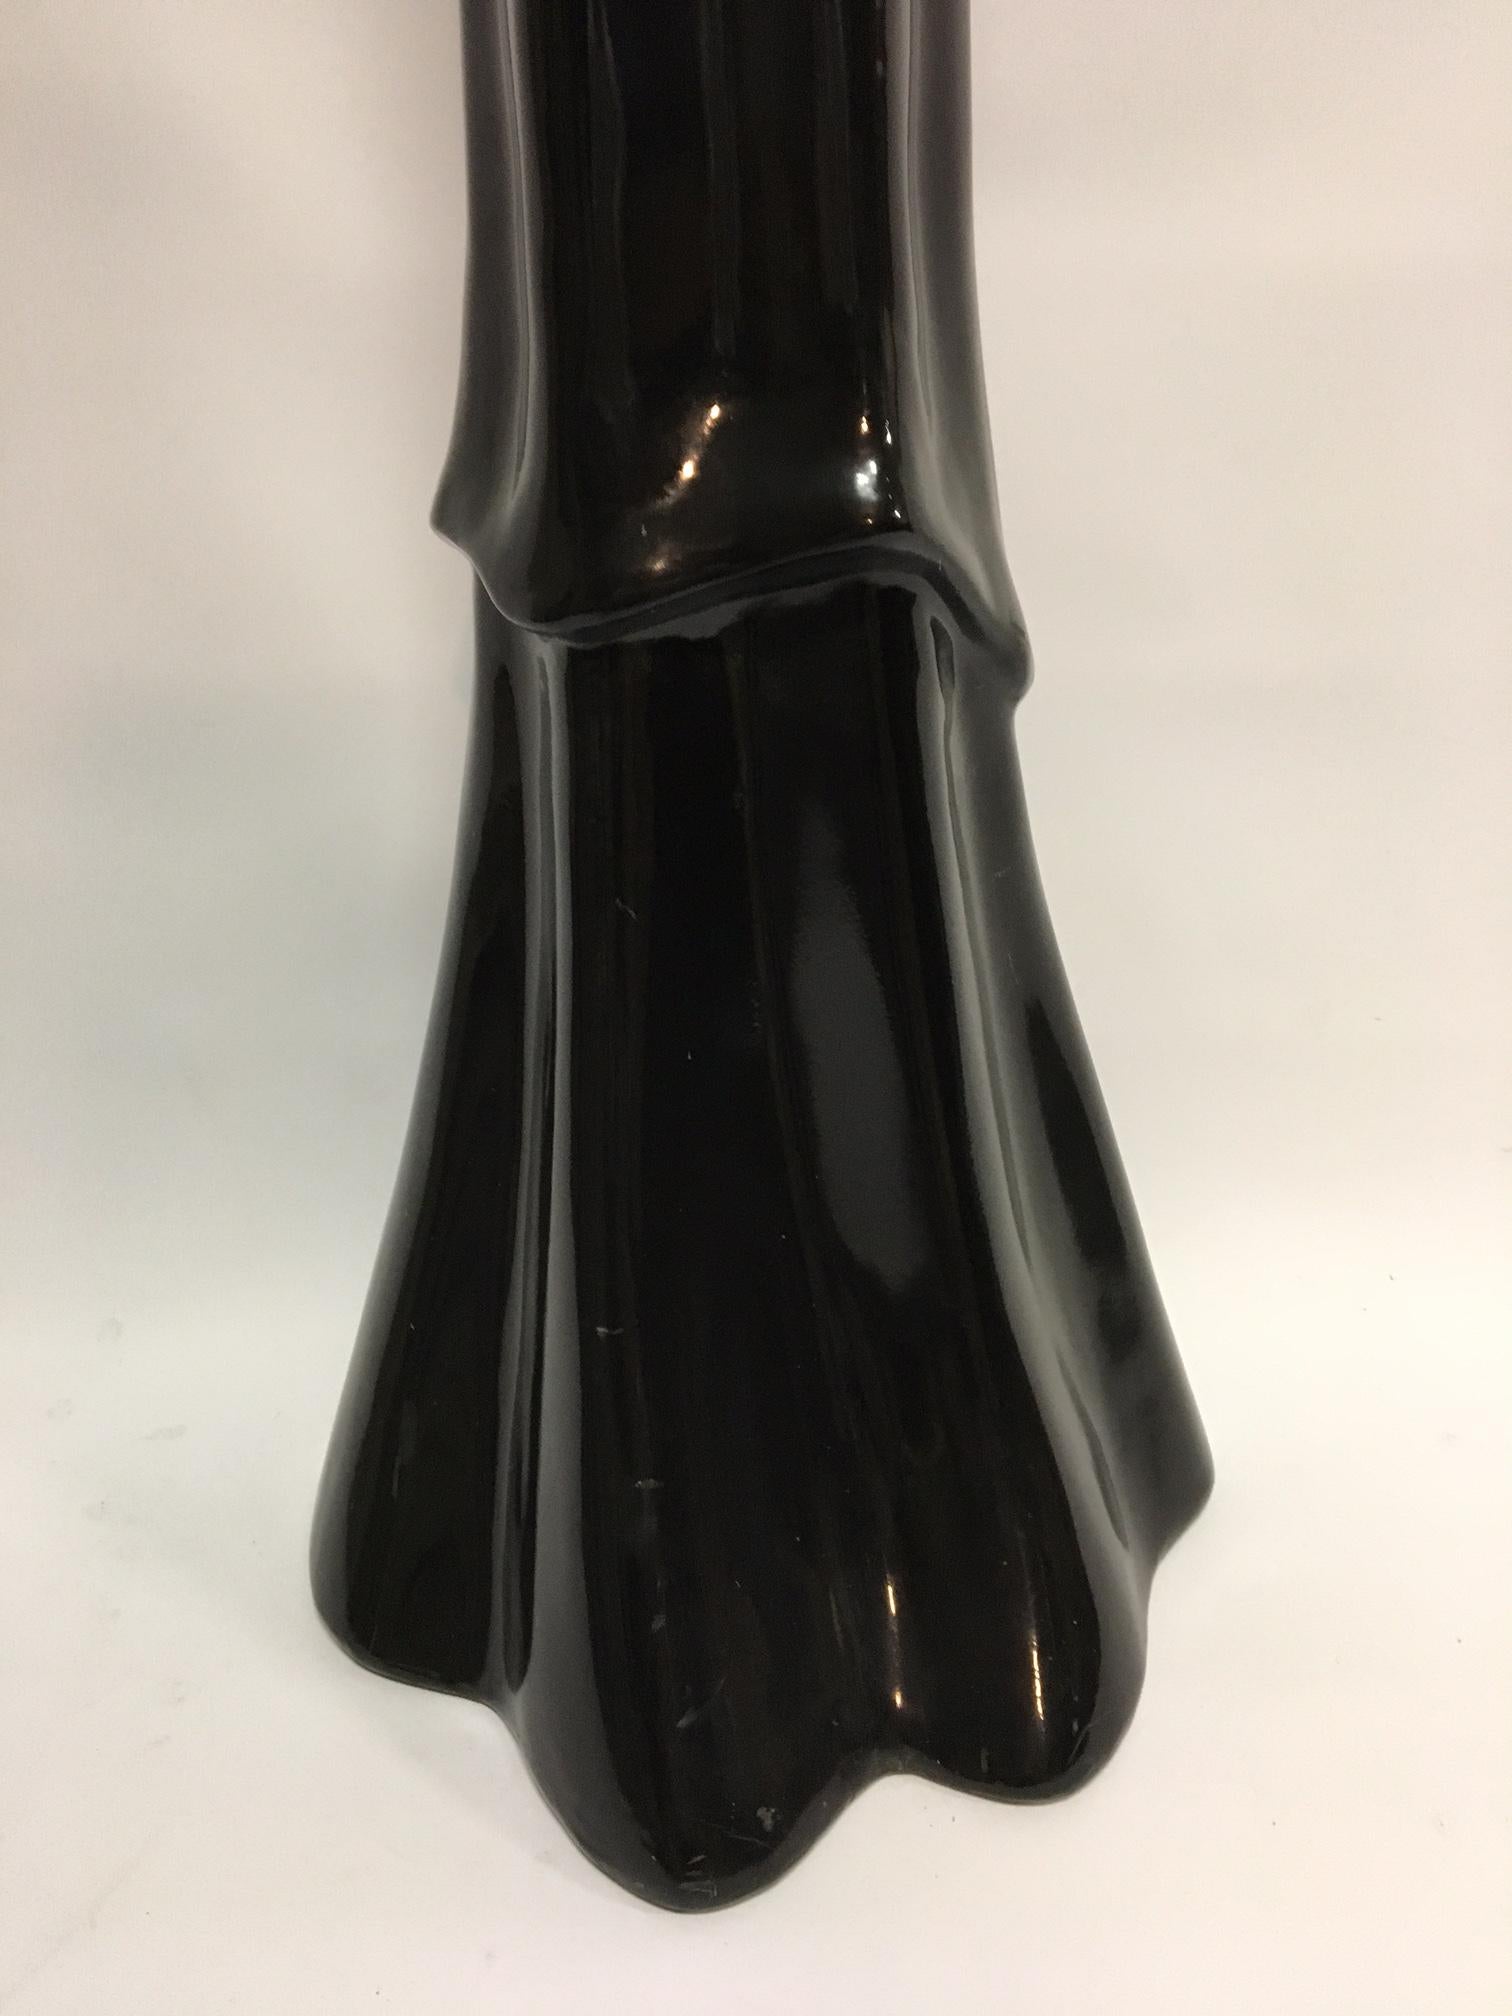 Serge Roche Black Draped Art Deco Torch Floor Wall Lamp In Good Condition In Jacksonville, FL